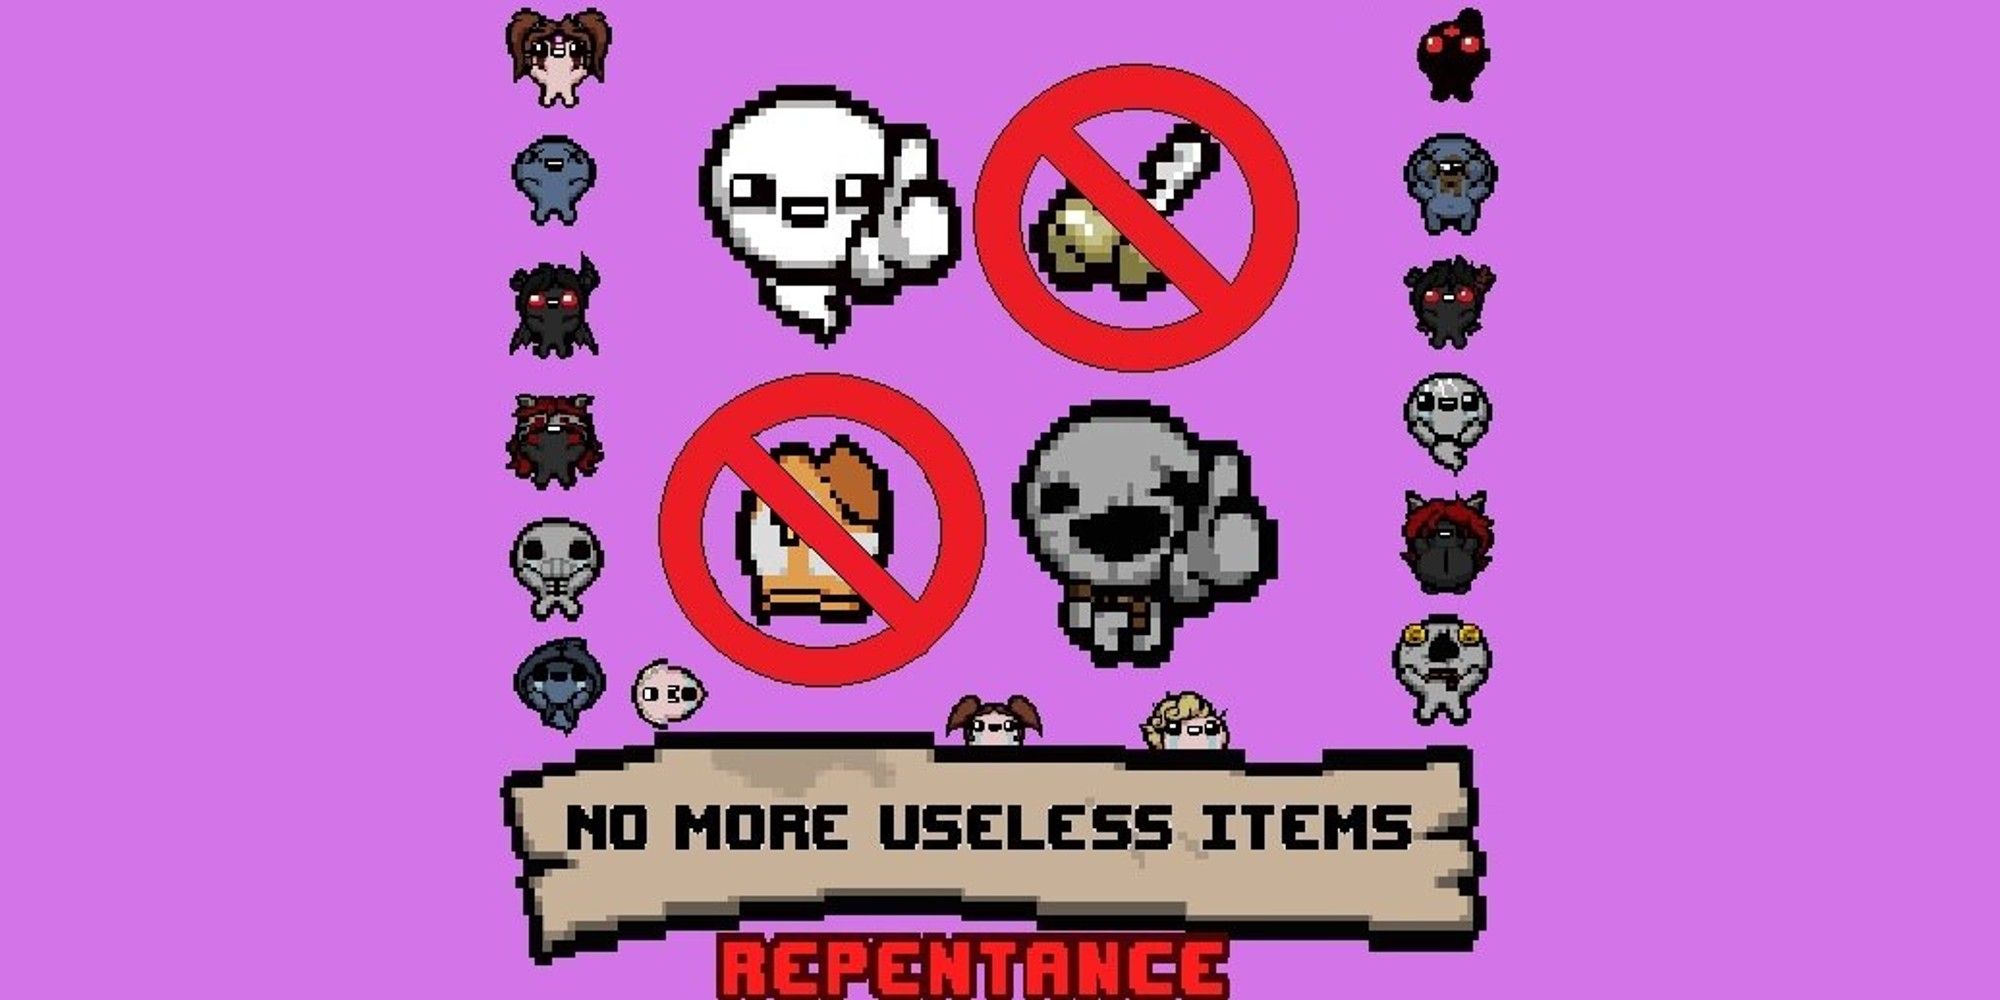 The Binding Of Isaac, No More Useless Items Mod, character sprites and blacklisted items seen with pink background